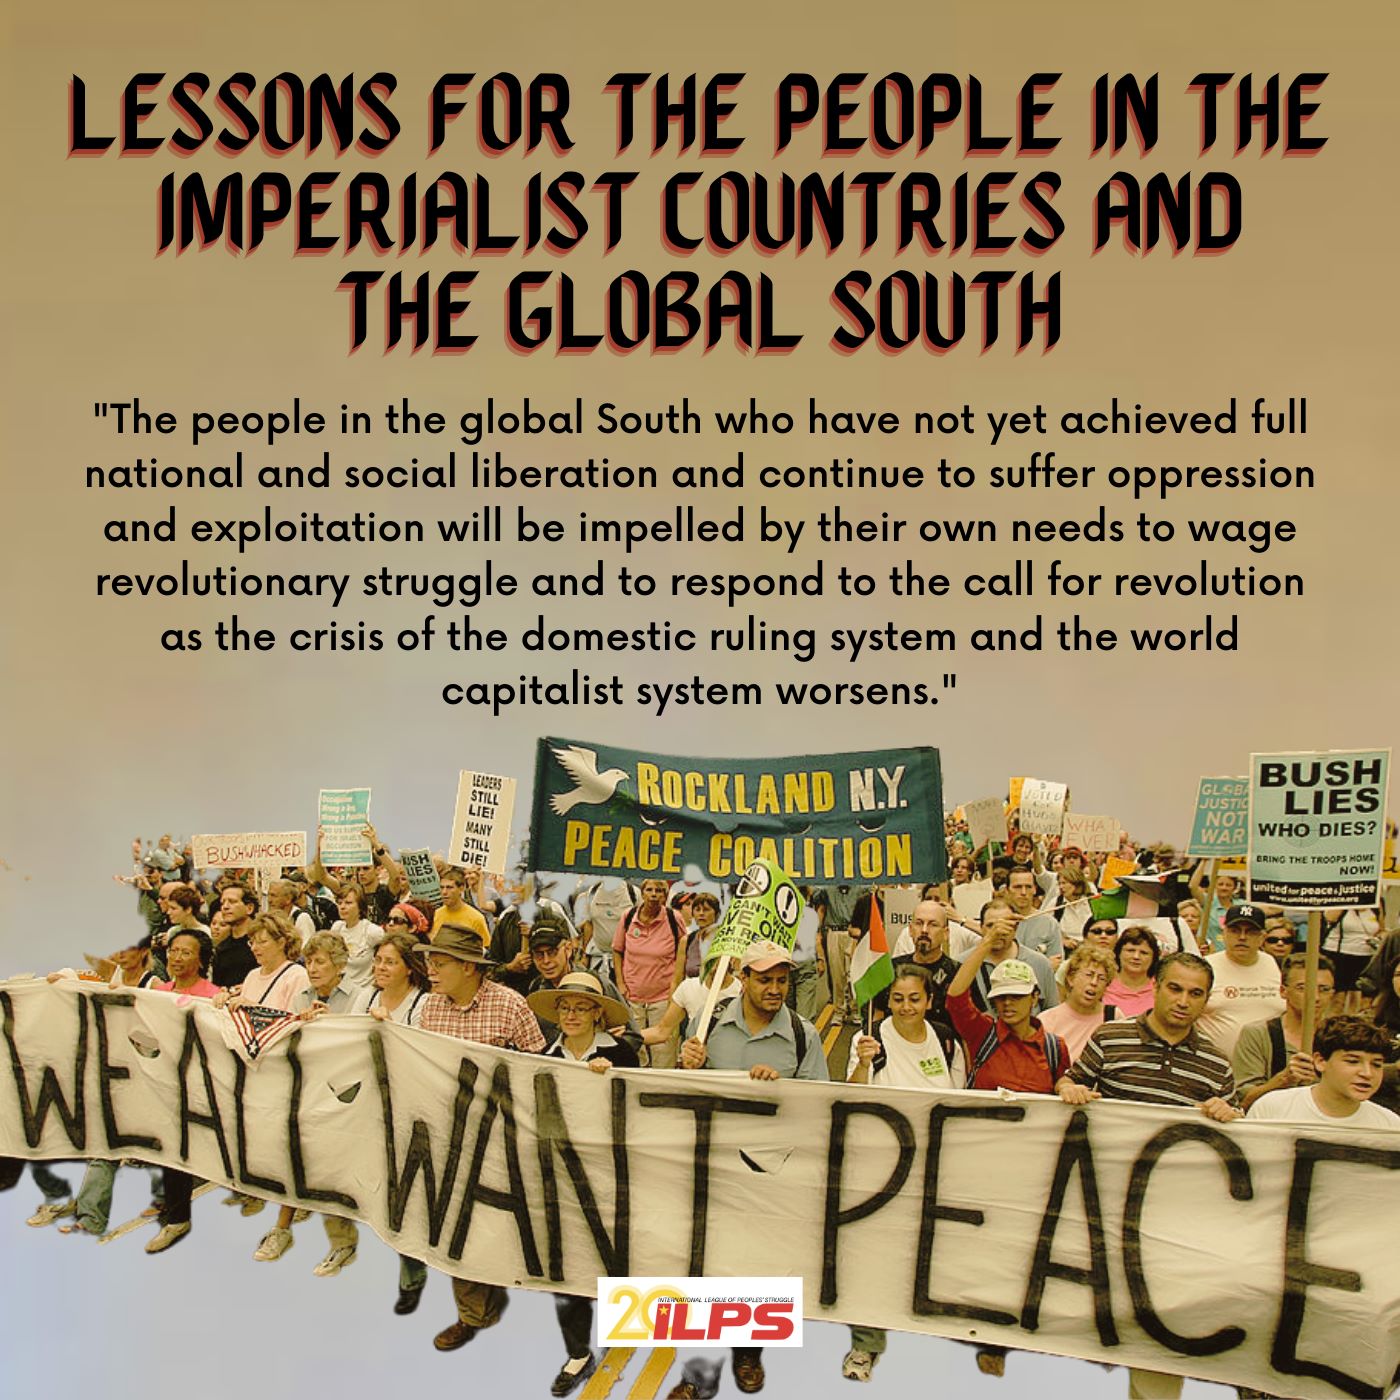 LESSONS FOR THE PEOPLE IN THE IMPERIALIST COUNTRIES AND THE GLOBAL SOUTH